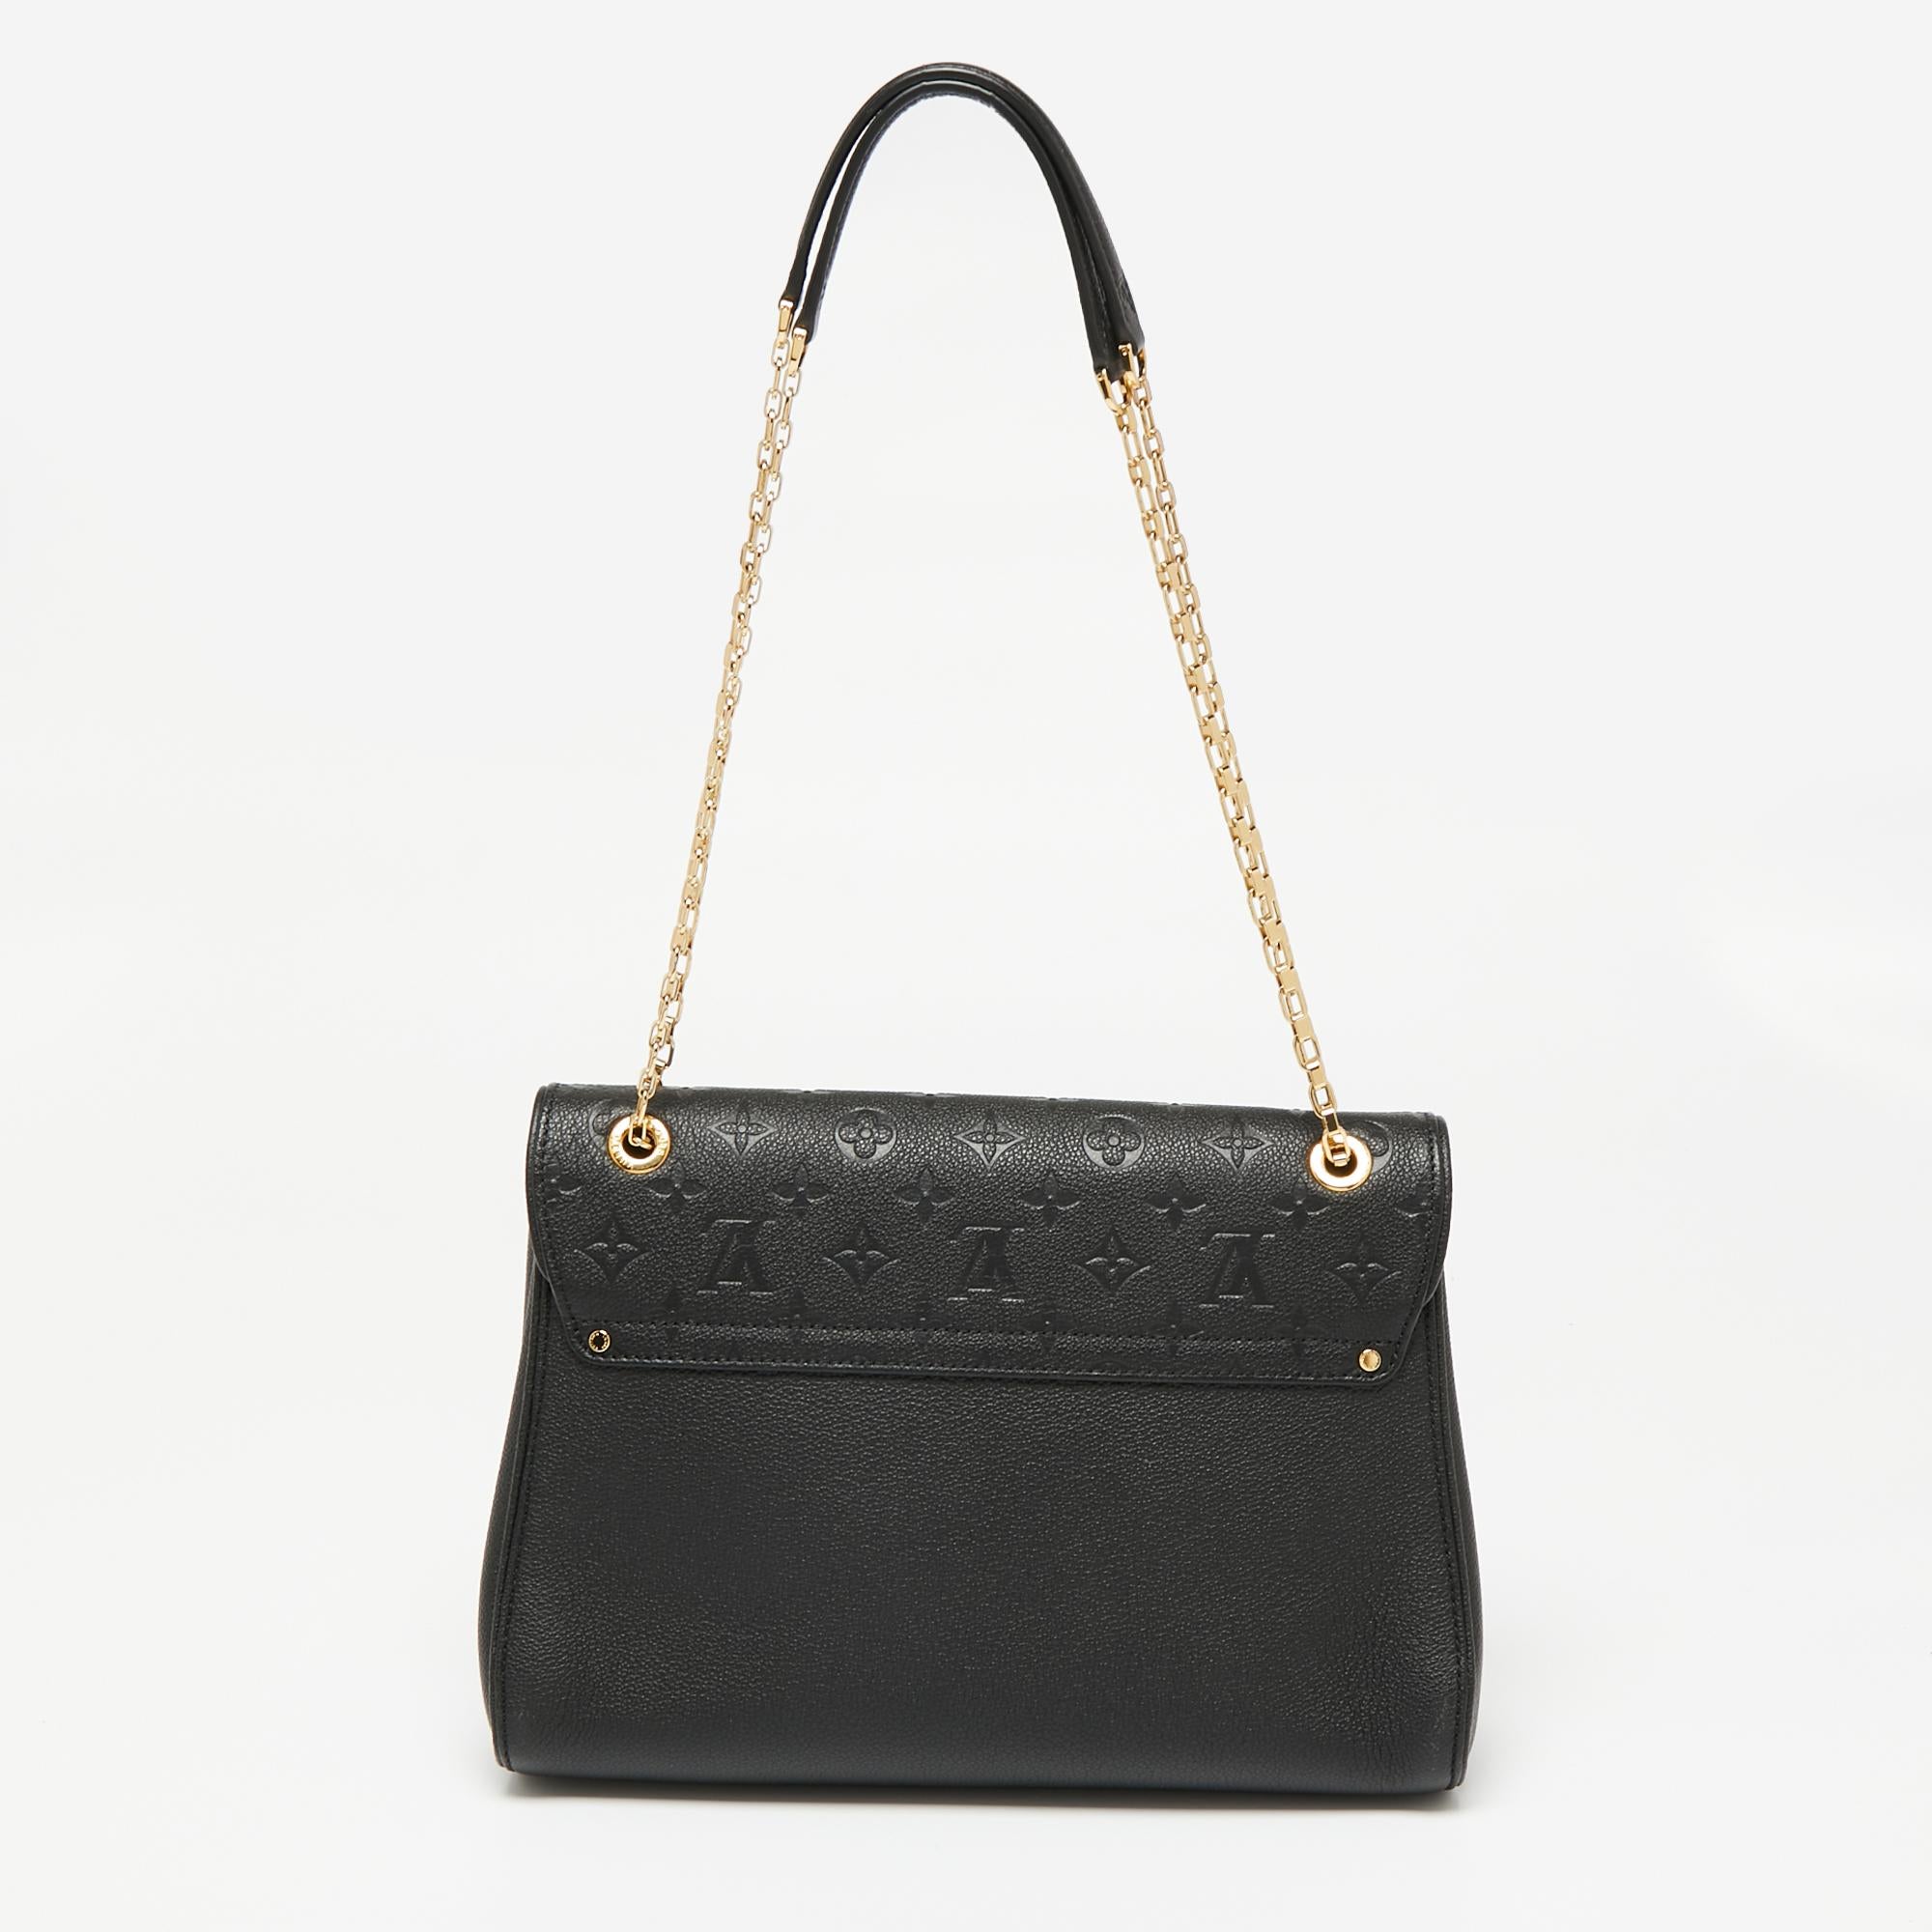 Merged beautifully with signature design, this St Germain MM bag from Louis Vuitton remains globally popular. This irresistible bag not just highlights your impeccable styling choices but also meets your practical demands. It is crafted using black